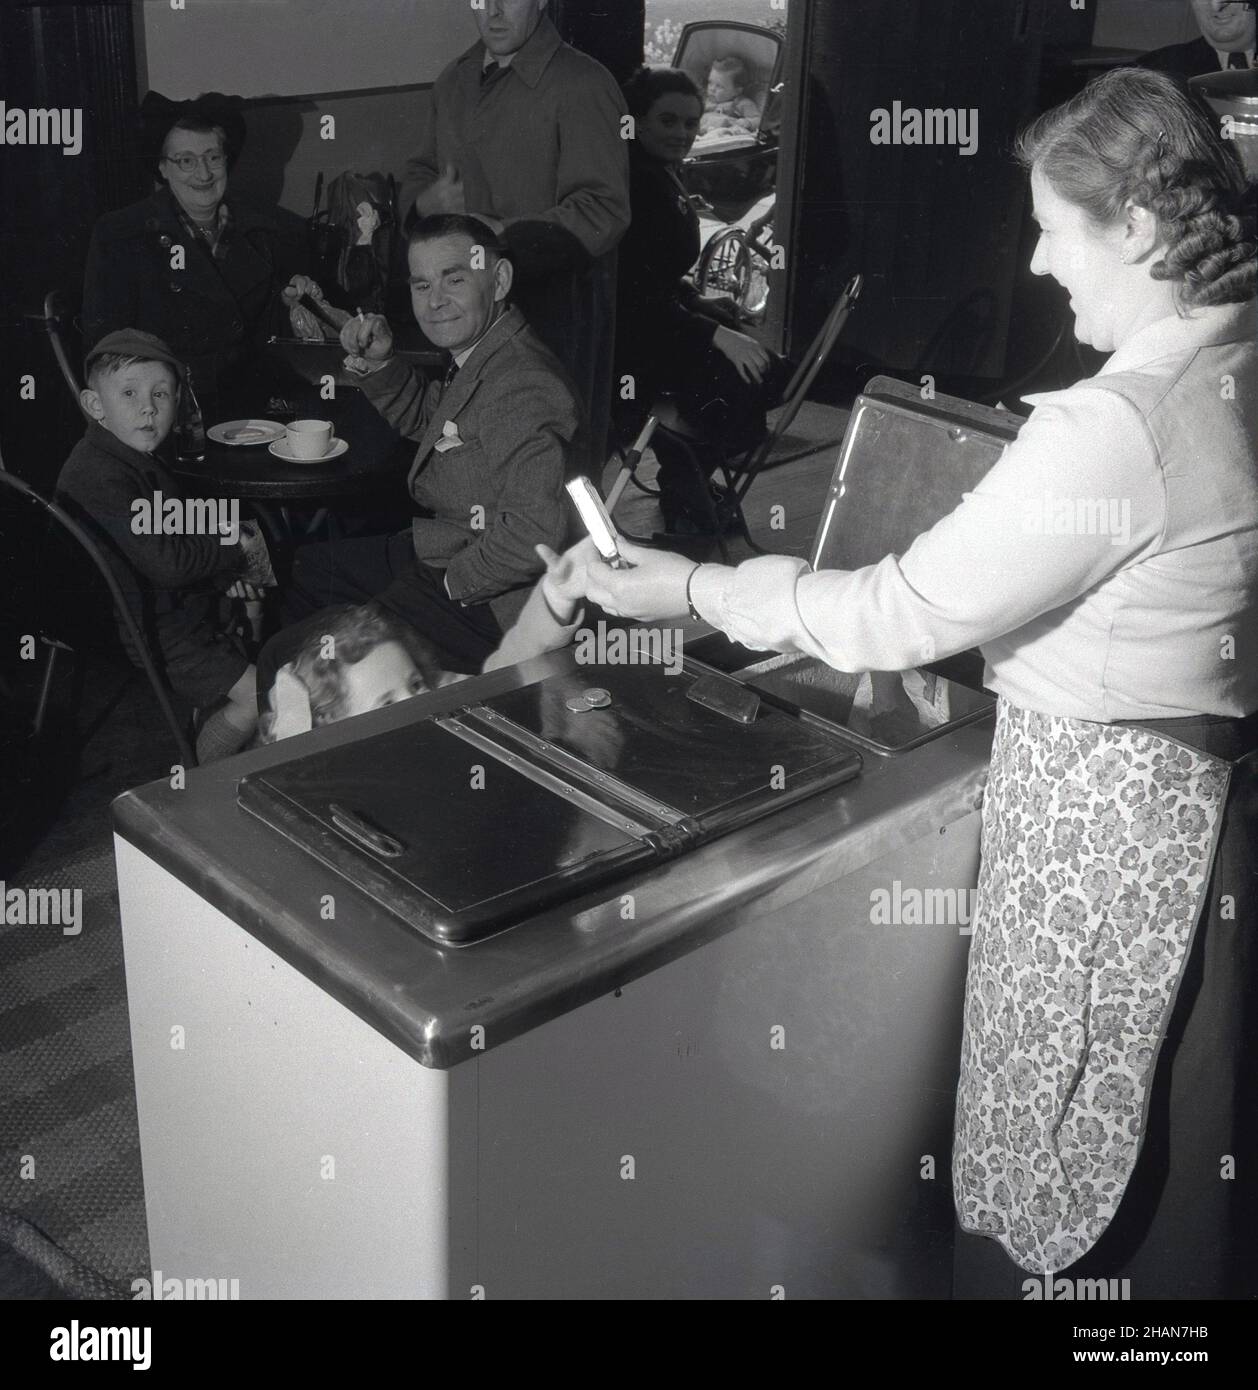 1950s, historical, inside a cafe, seated customers look on, as a little girl, having put some coins on the lid of the chest freezer, is given an ice cream wafer from the lady owner, London, England, UK. Stock Photo